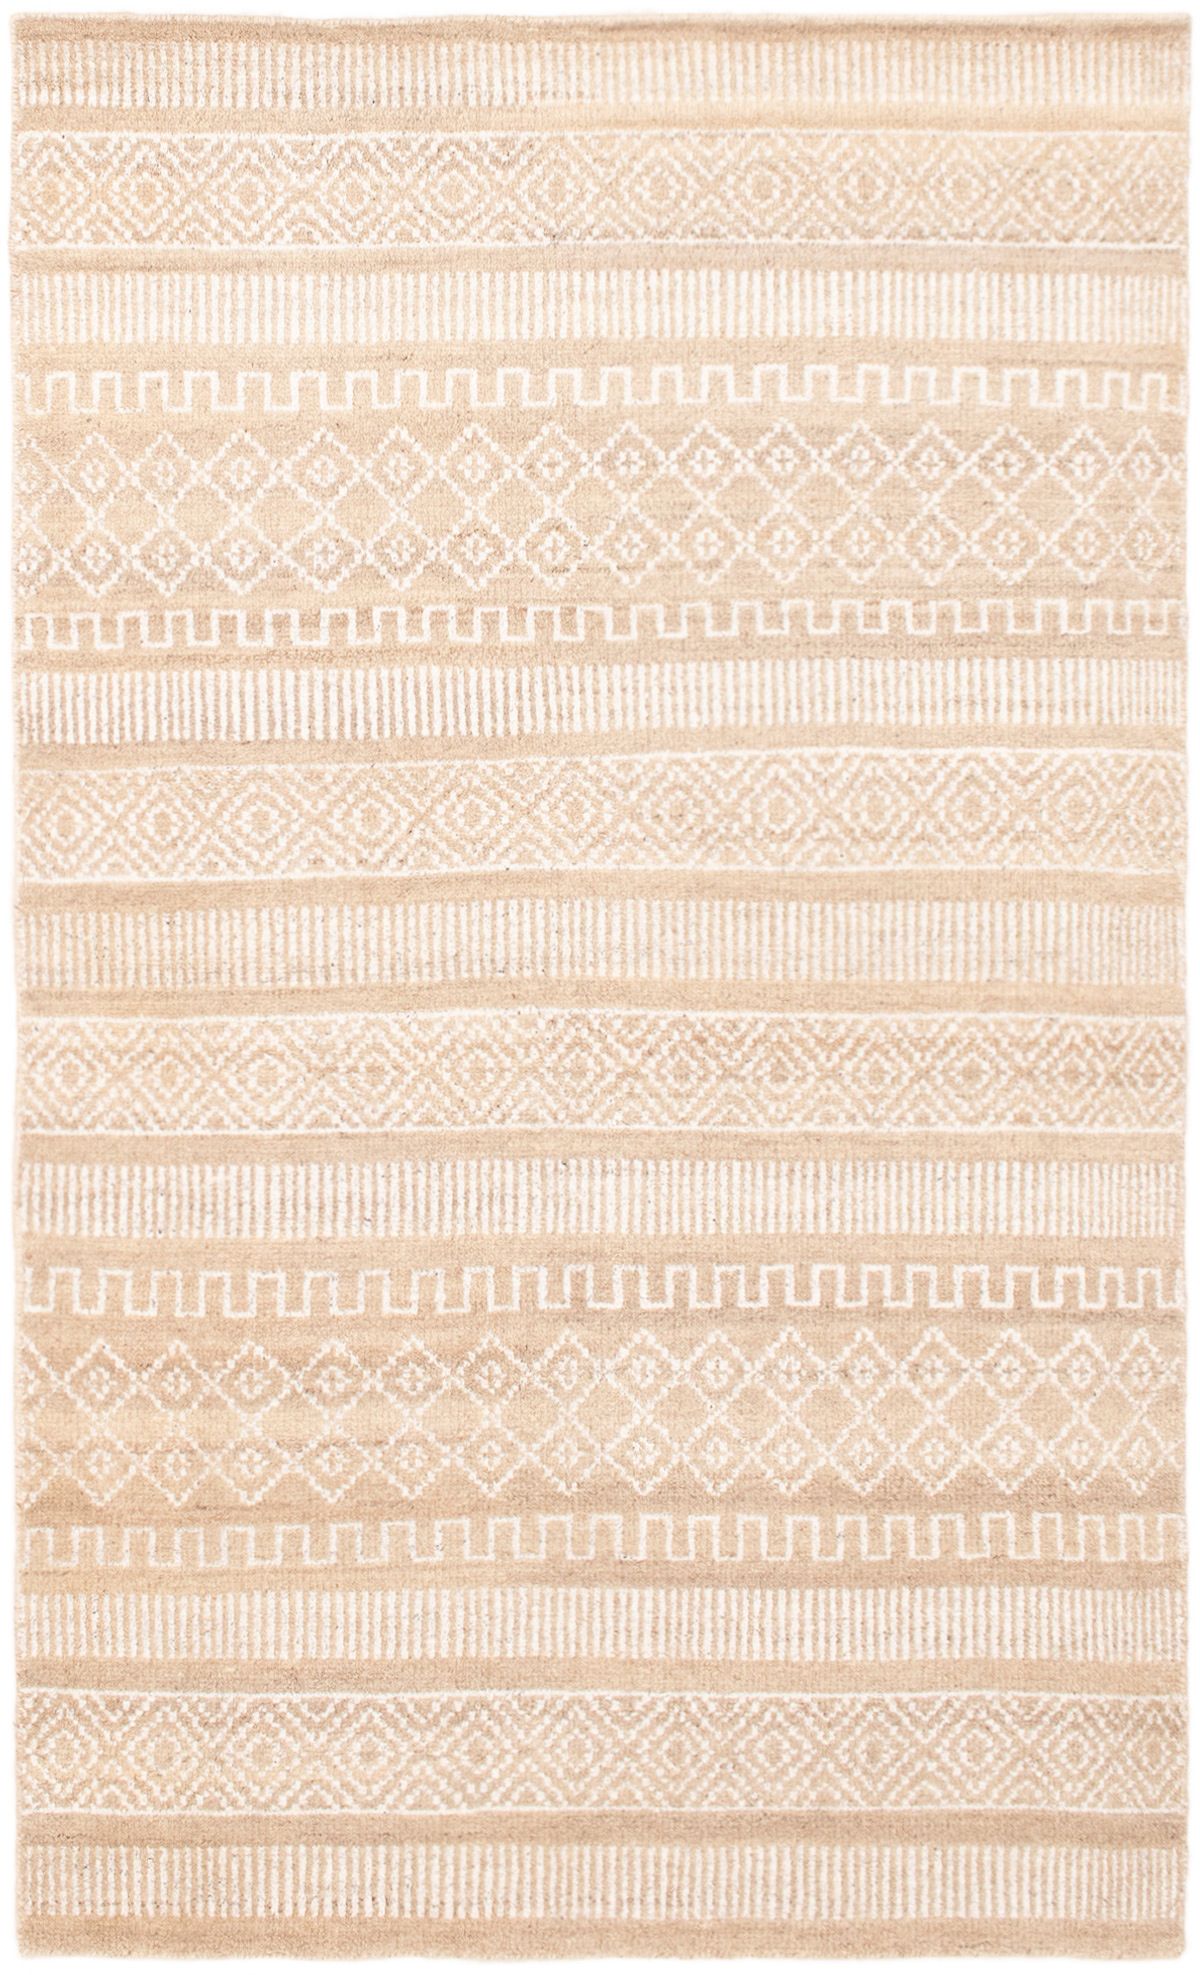 Hand-knotted Tangier Tan Wool Rug 4'10" x 8'0" Size: 4'10" x 8'0"  